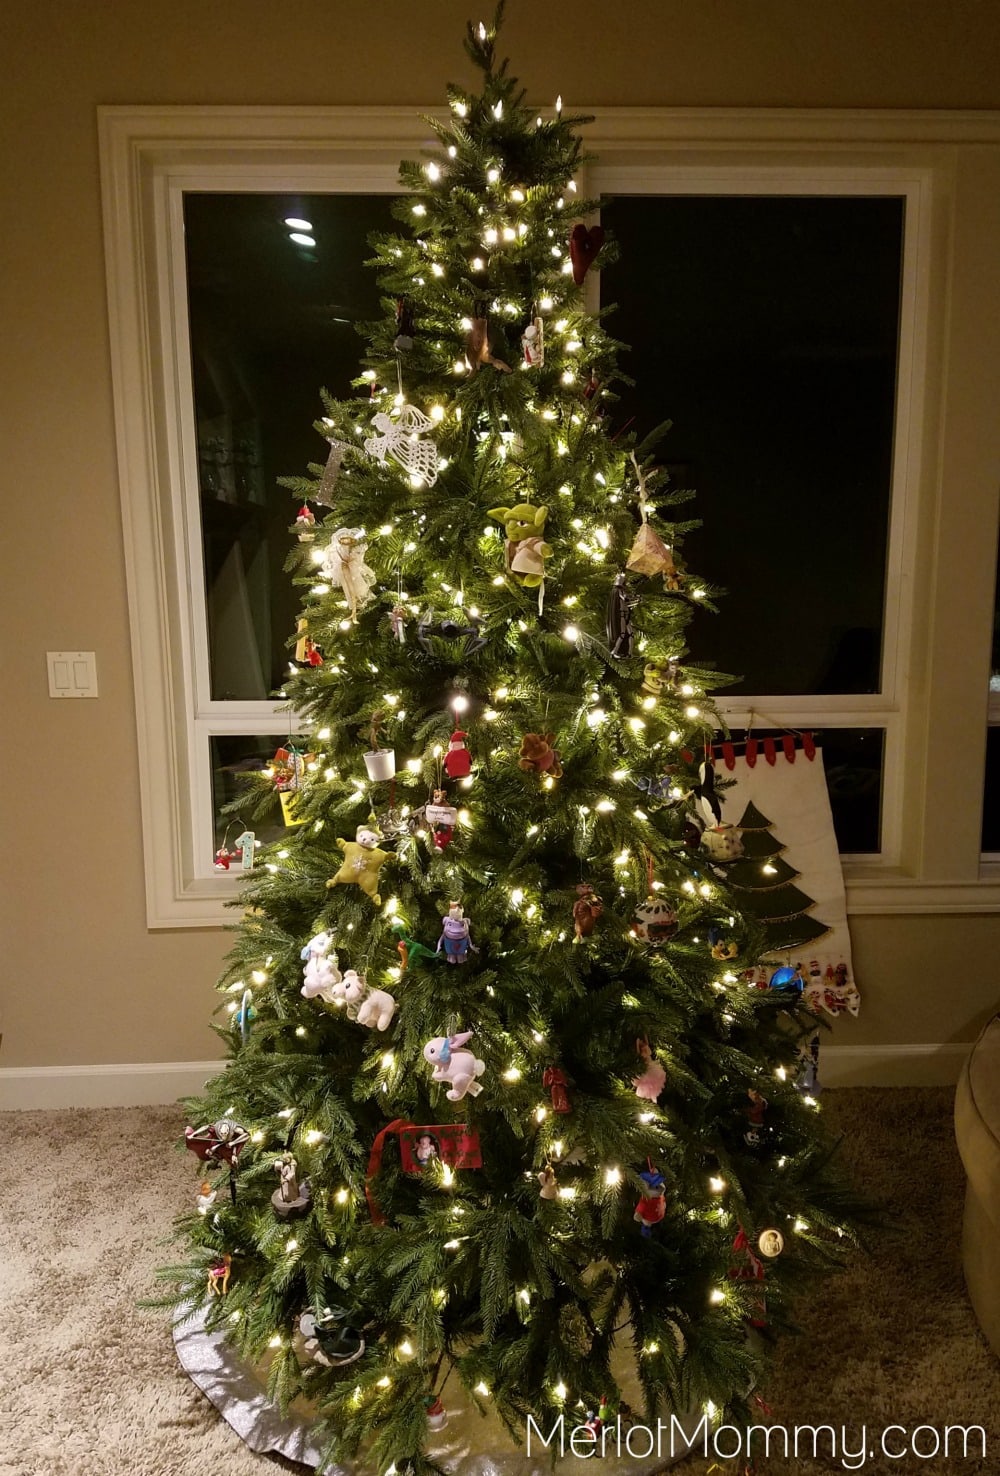 Make Decorating Your Tree for the Holidays Easy with ULTIMA Tree